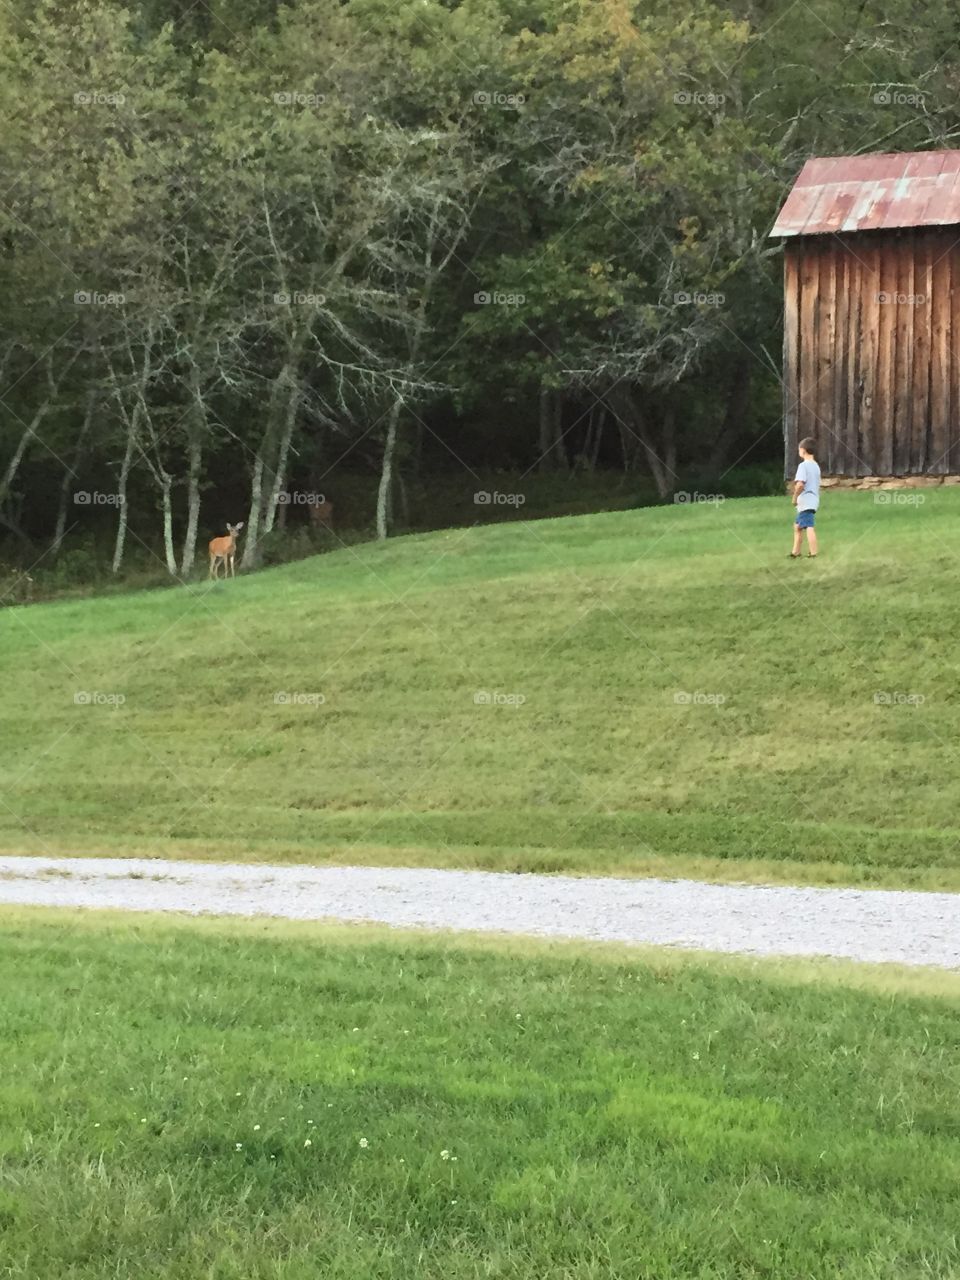 Country living. A young boy is making friends with a deer